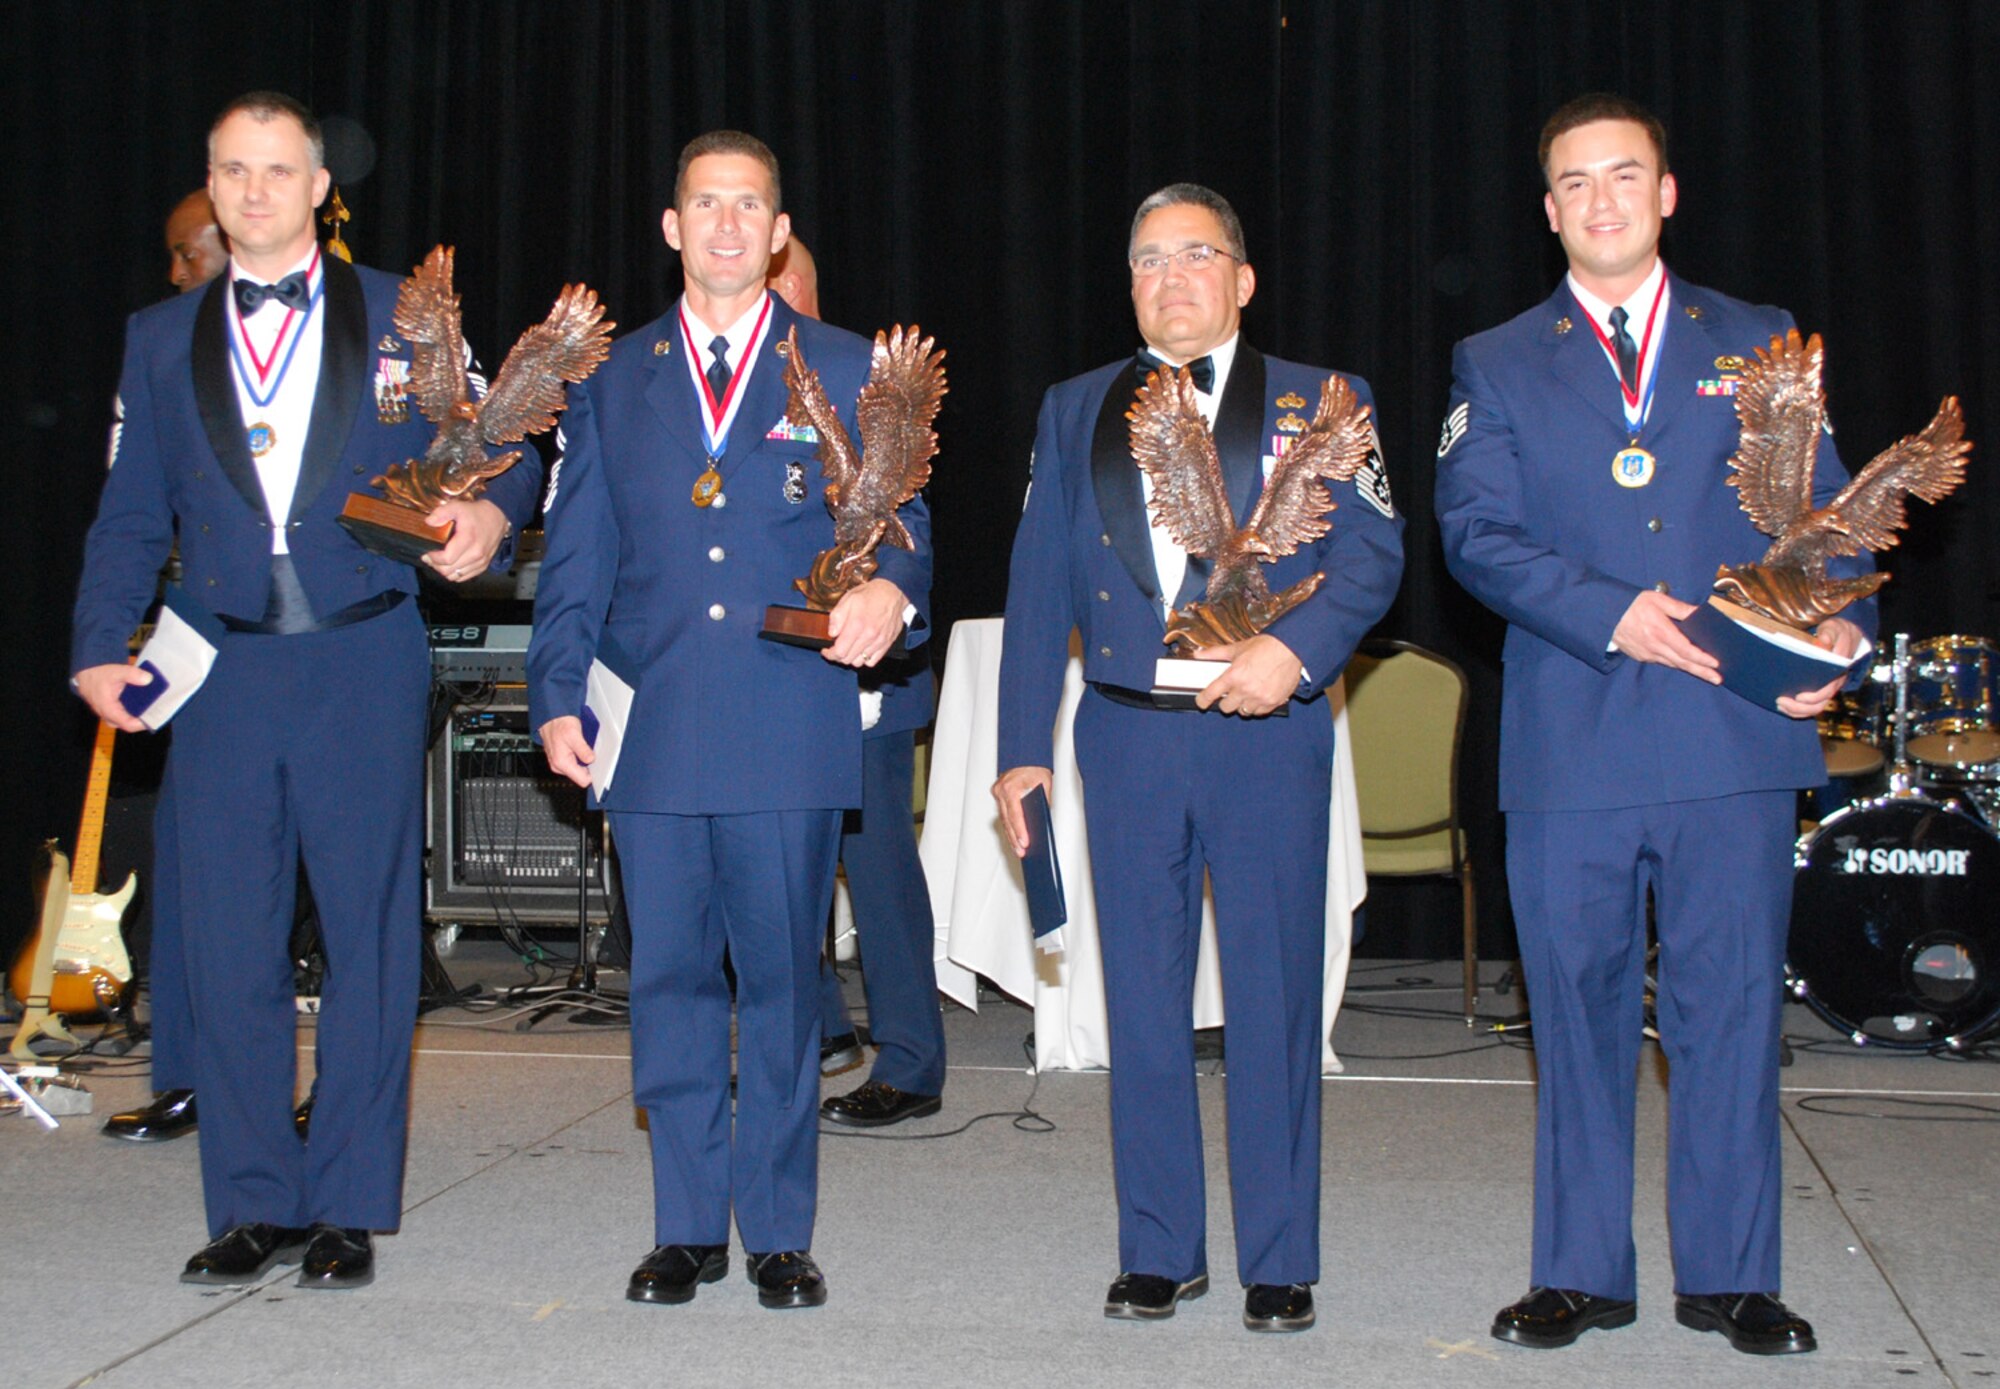 Air Force Reserve Command's Outstanding Airmen of the Year receive their awards at the AFRC annual awards banquet April 14, 2010. From left they are Senior Master Sgt. Mark Barber; Senior Master Sgt. Steven West; 944th Fighter Wing Command Chief Master Sgt. Pablo Valverde Jr., accepting on behalf of Tech. Sgt. Stephen Hunter Jr.; and Staff Sgt. James McKeown. (U.S. Air Force photo/Staff Sgt. Celena Wilson)